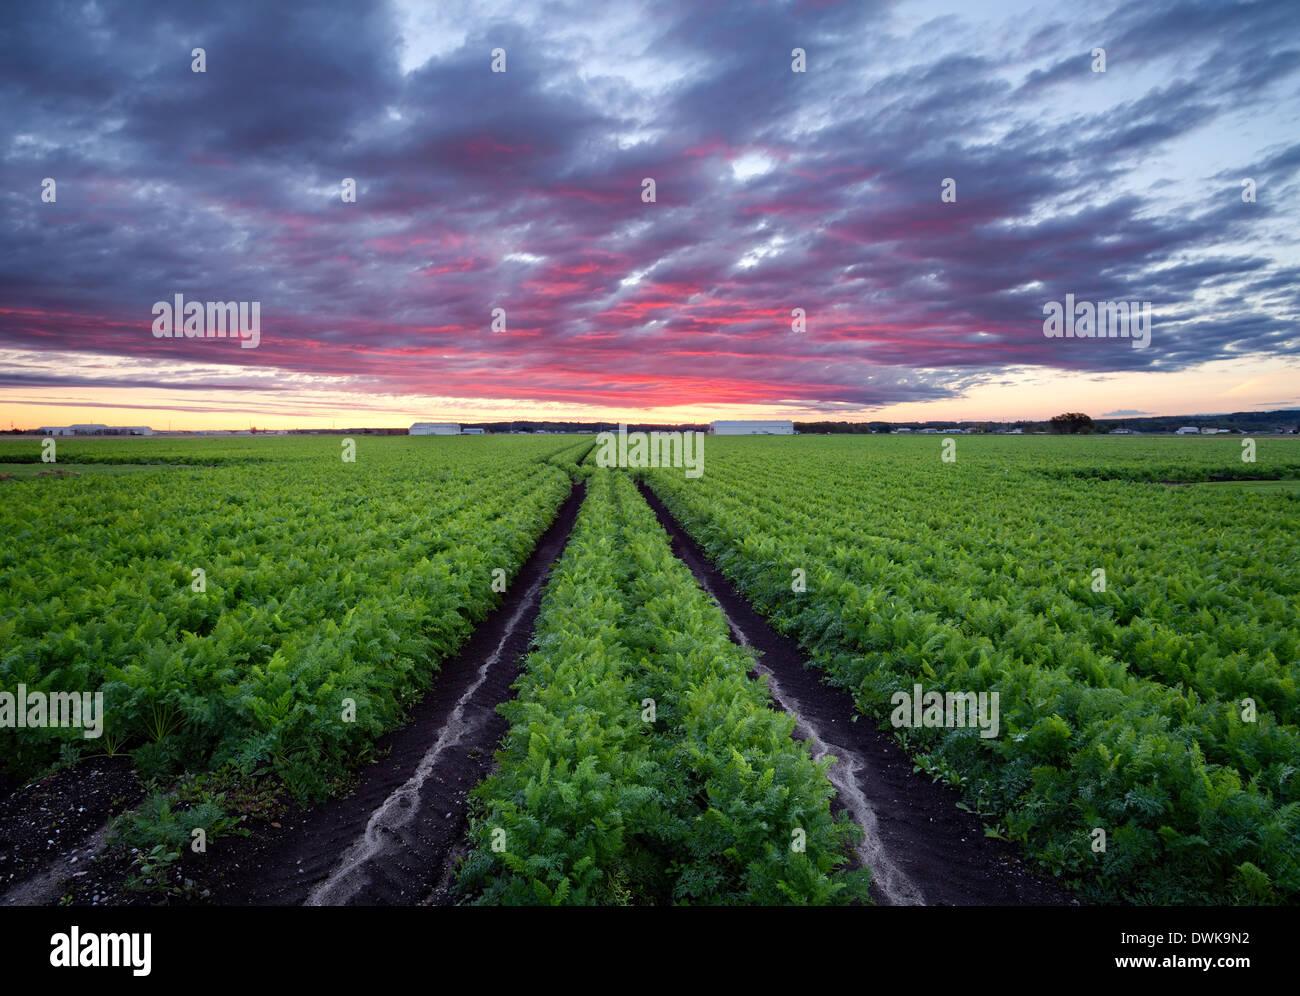 A mature field of carrots in the Holland marsh in Bradford West Gwillimbury, Ontario, Canada. Stock Photo